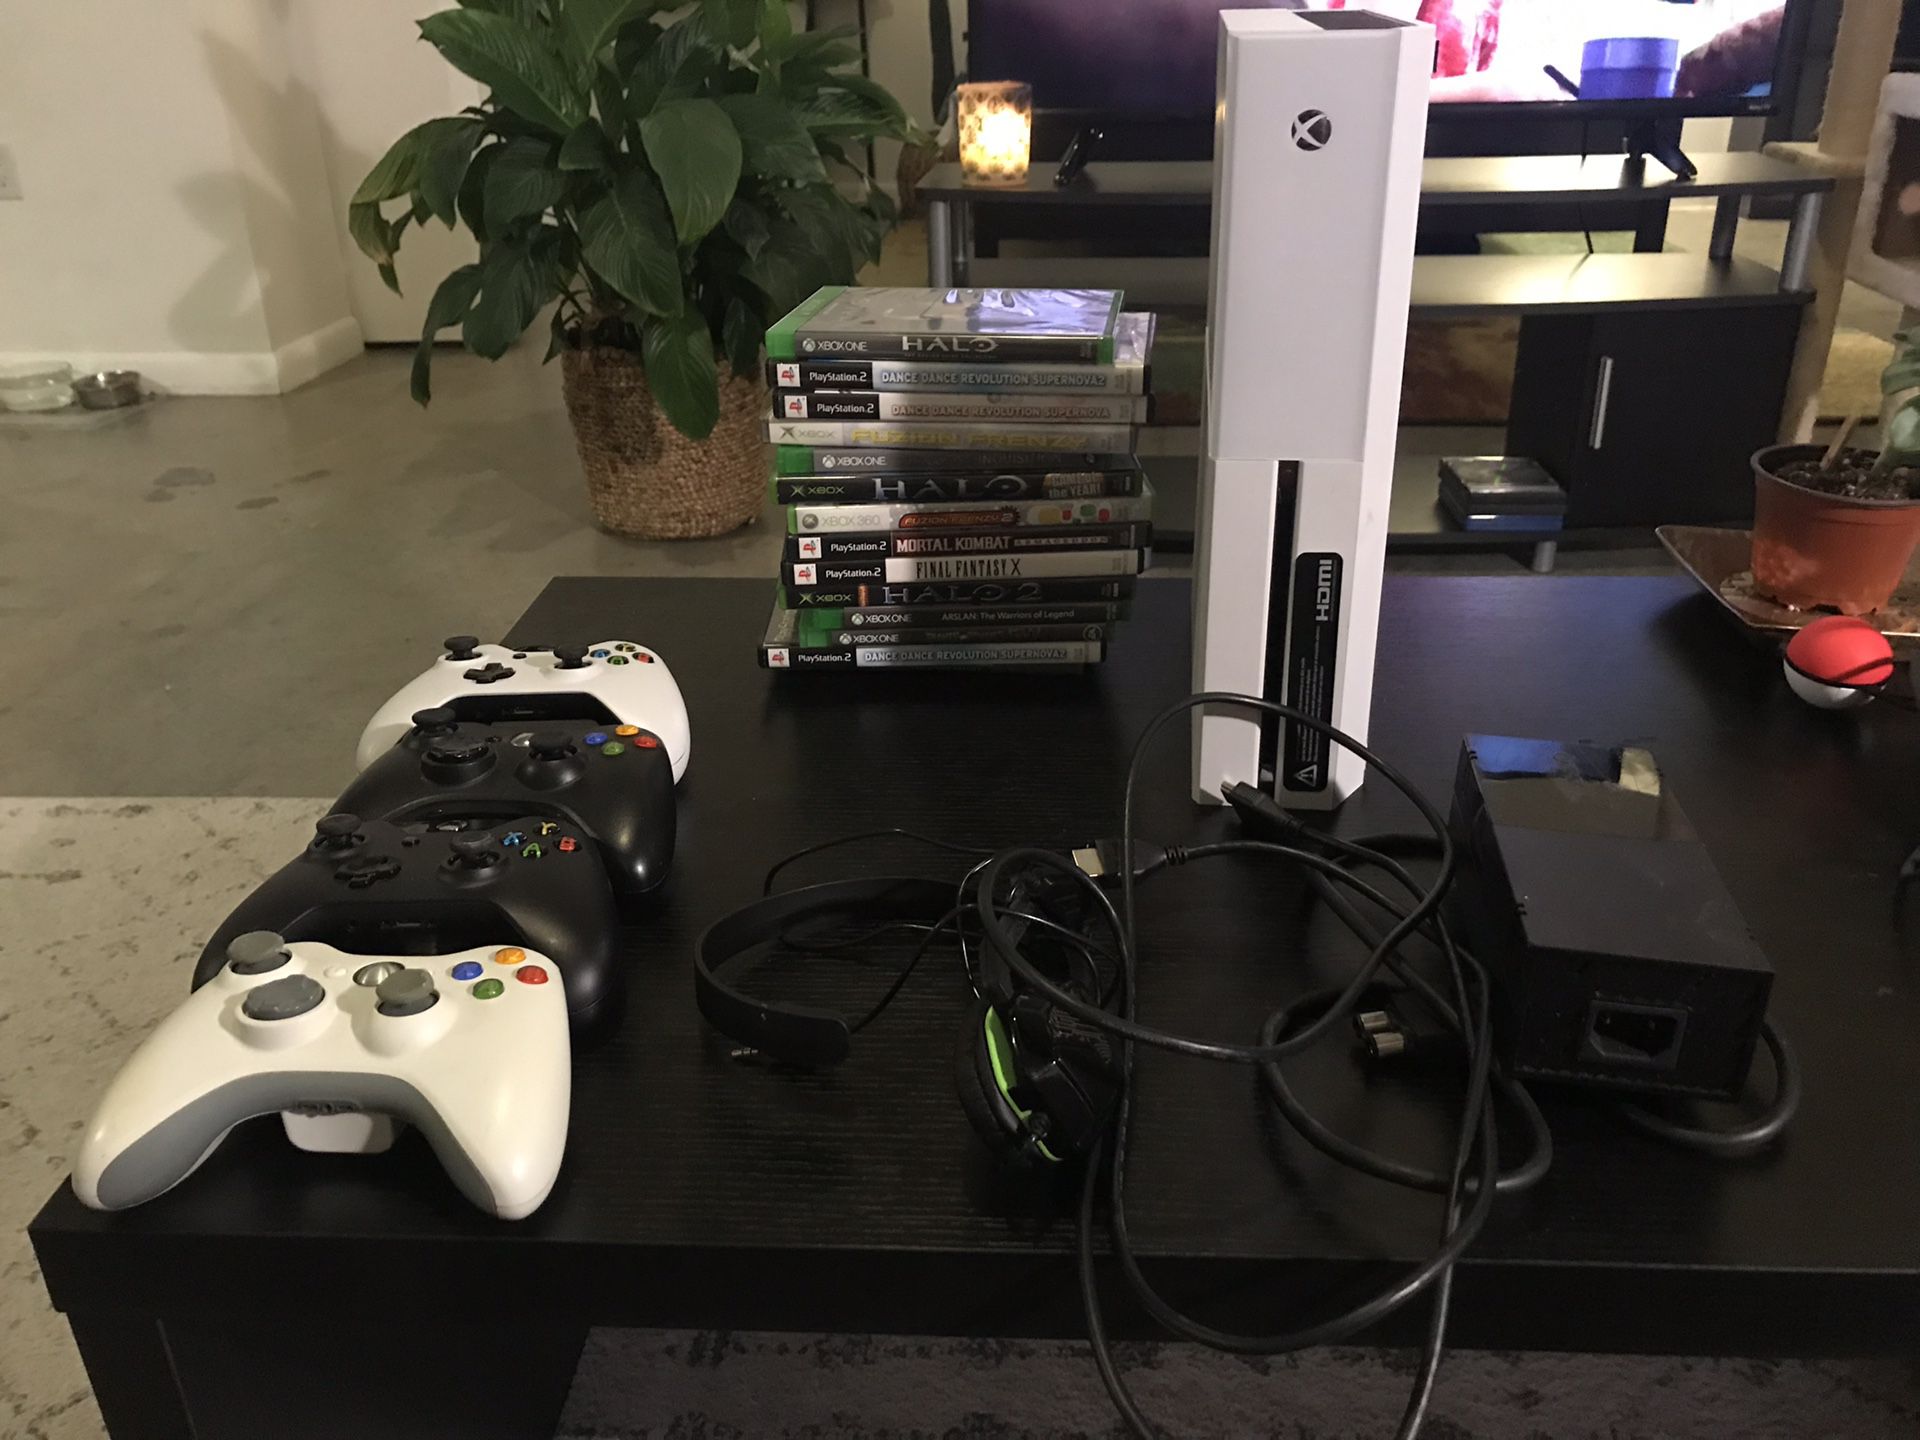 Xbox One, controllers and games included